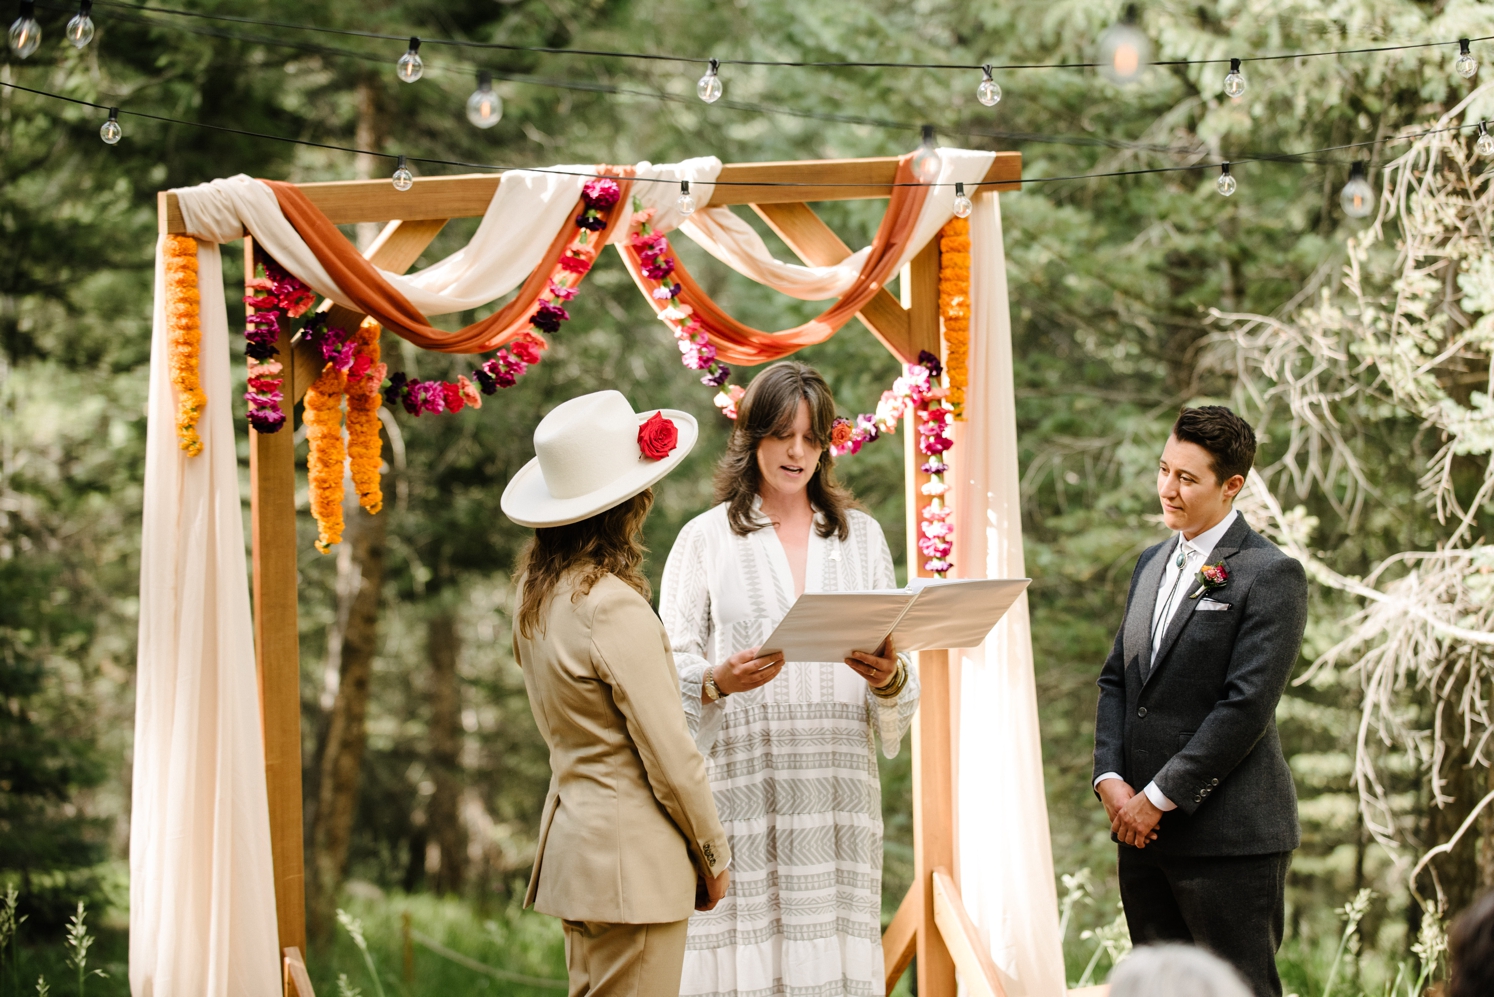 Couple looking at each other during LGBTQ wedding ceremony | McArthur Weddings and Events